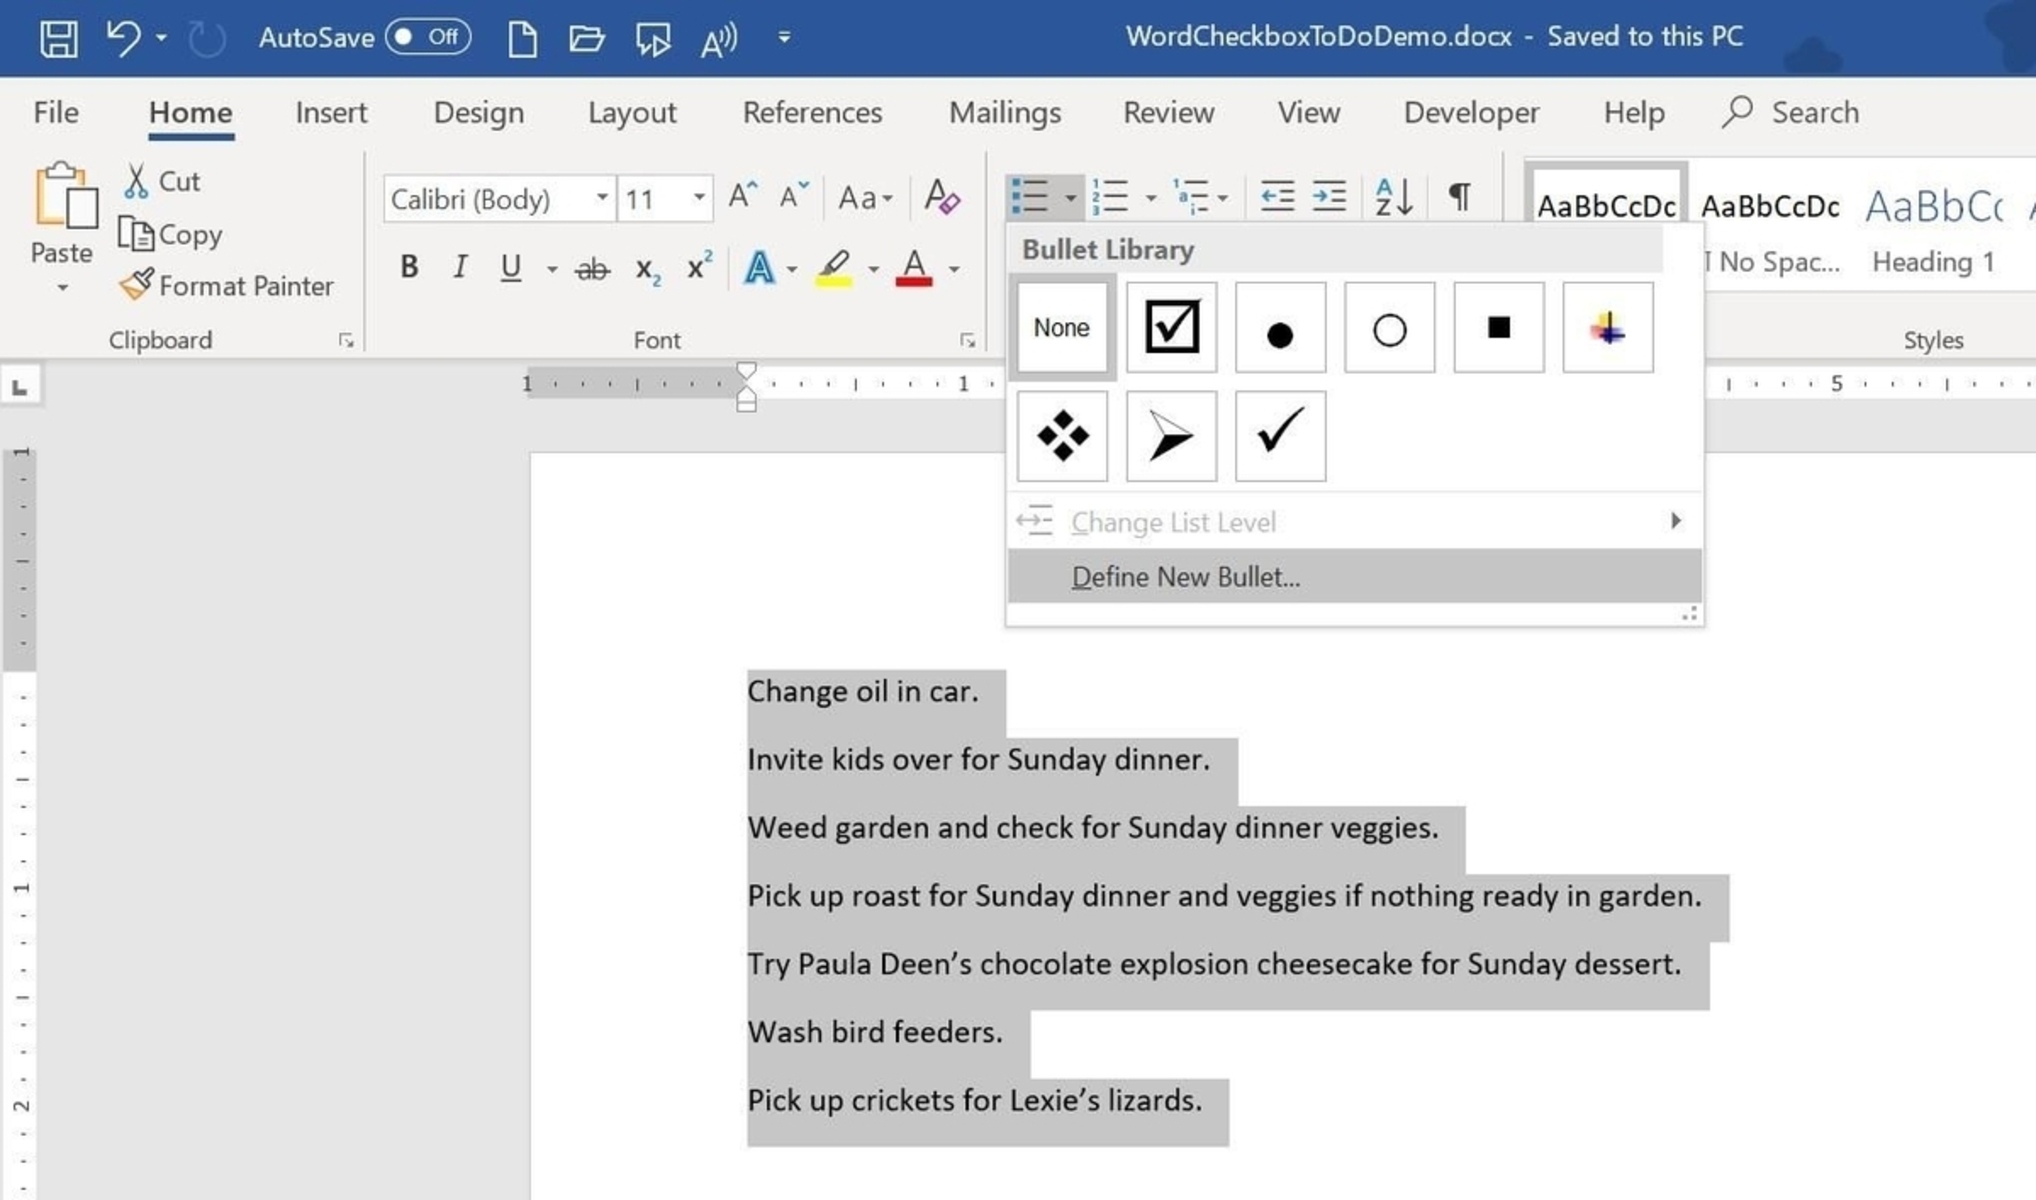 How To Make A Check Mark With A Keyboard In MS Office